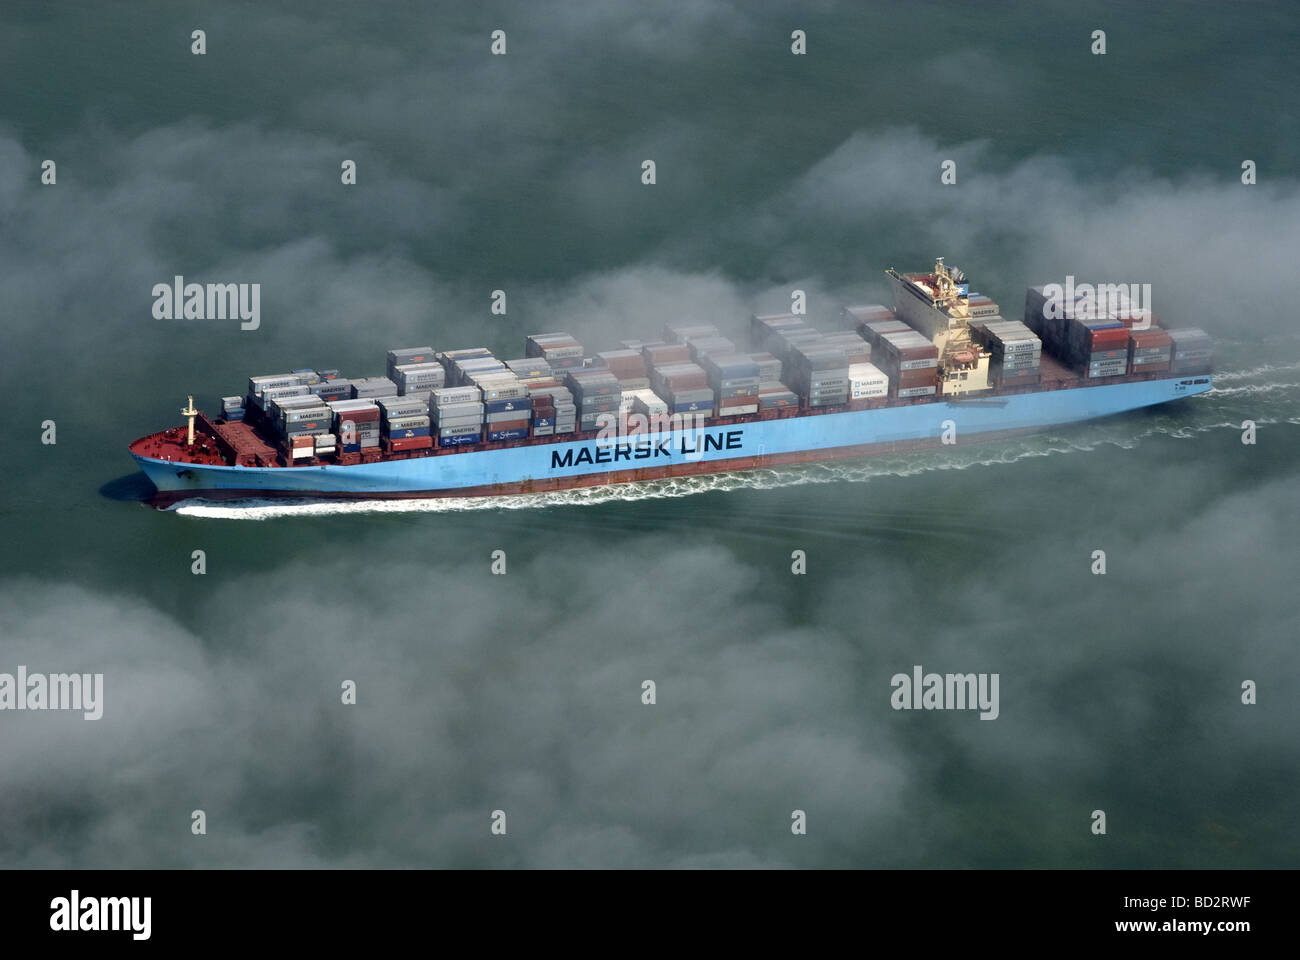 The Maersk Seville emerging from the sea fog. Stock Photo